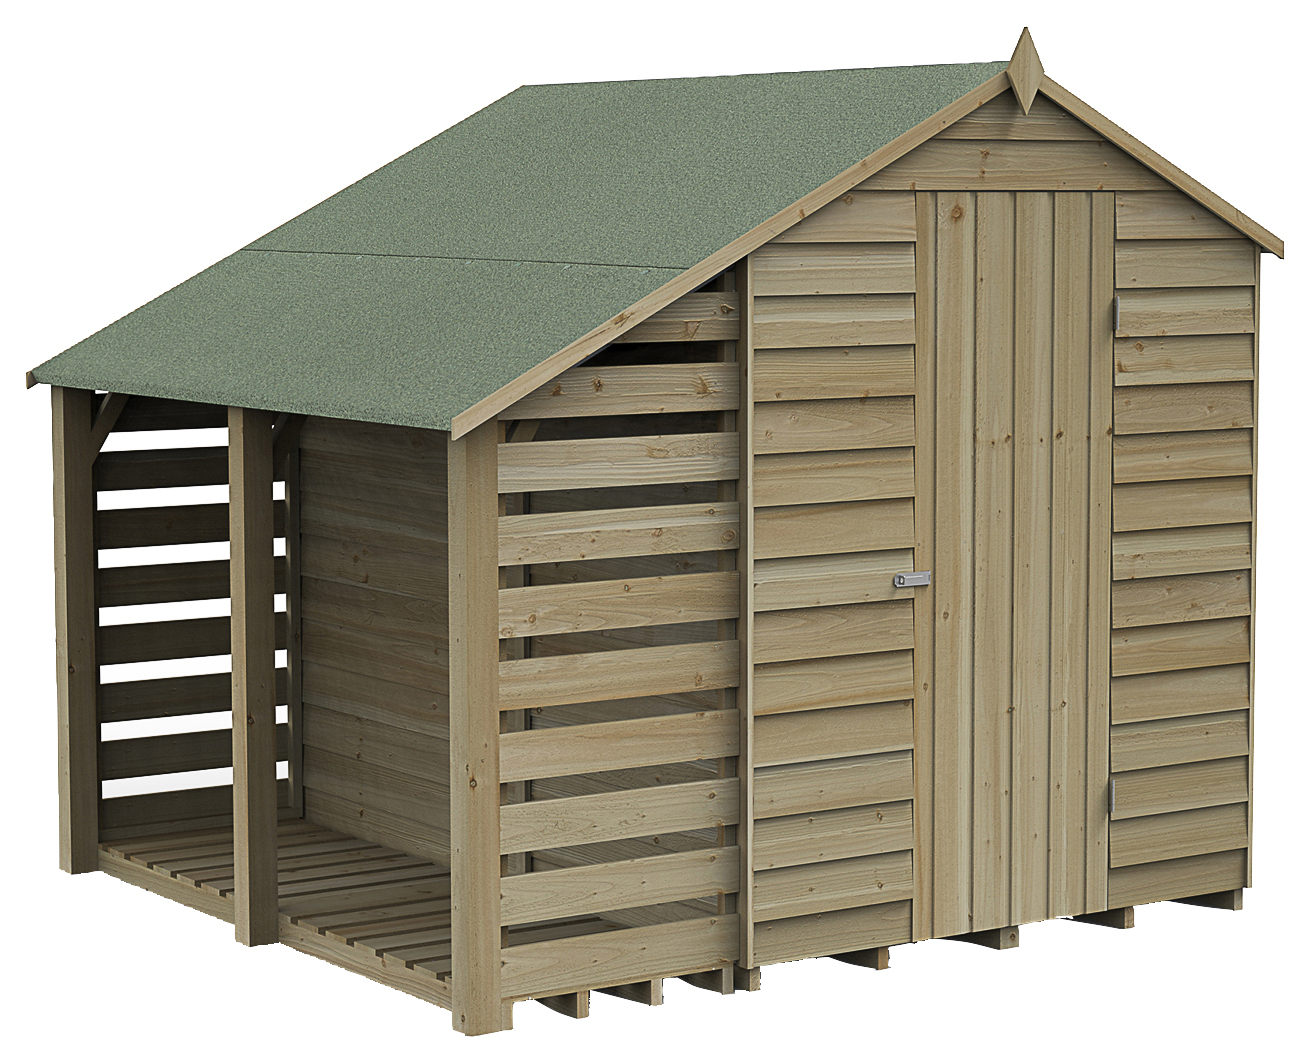 Image of Forest Garden 7 x 5ft 4Life Apex Overlap Pressure Treated Windowless Shed with Lean-To and Assembly